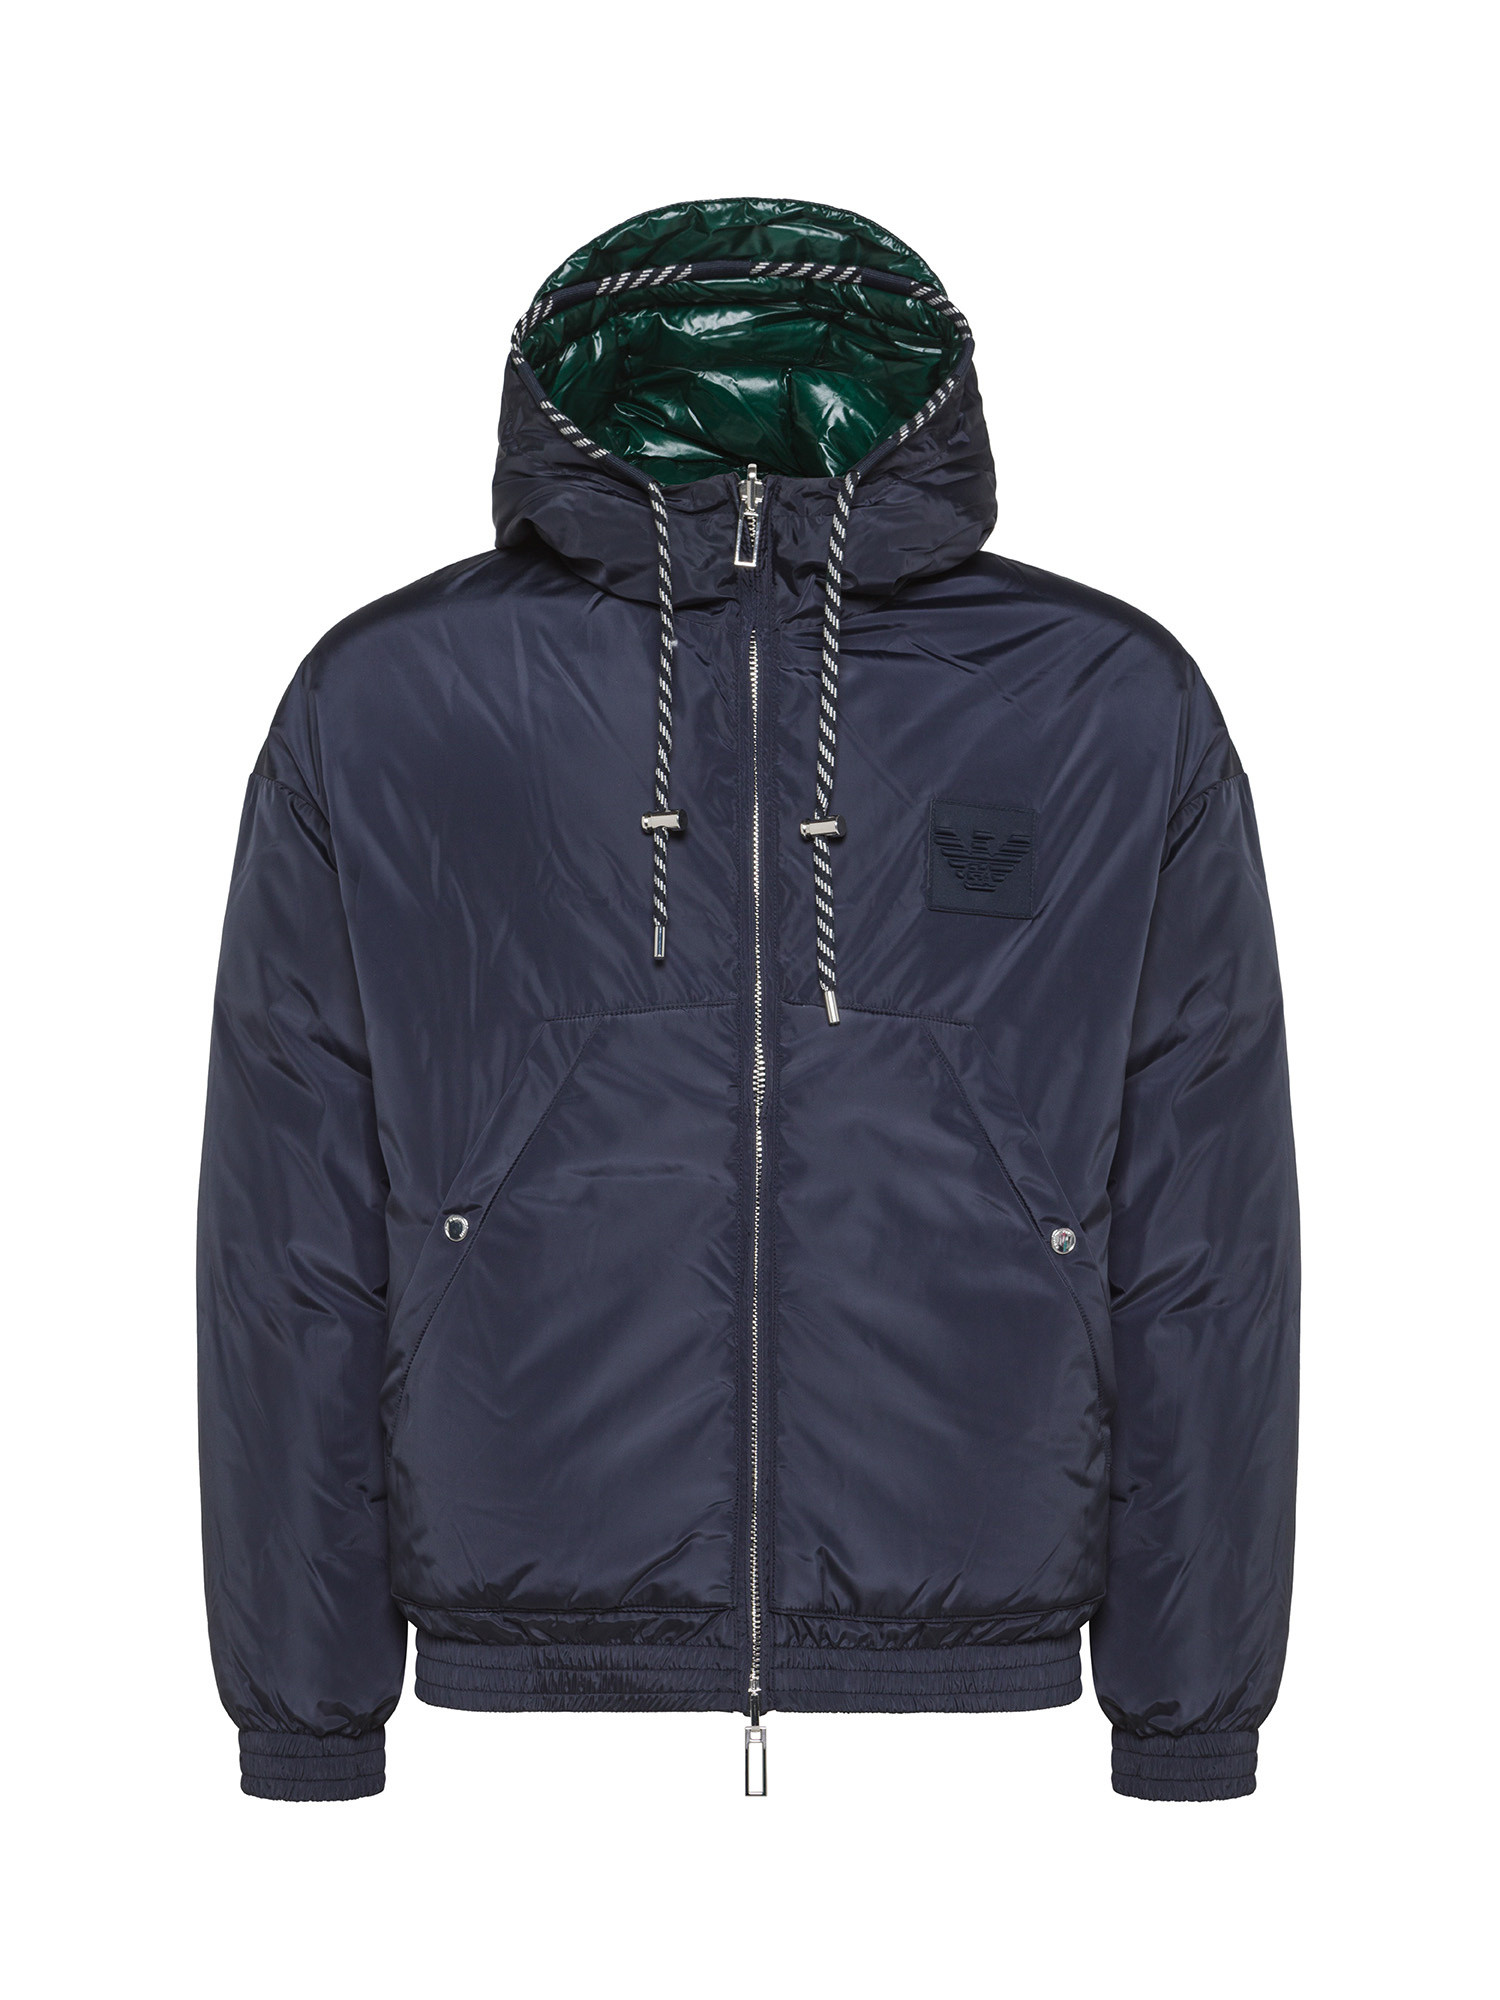 Emporio Armani - Reversible down jacket with hood in nylon, Dark Blue, large image number 0